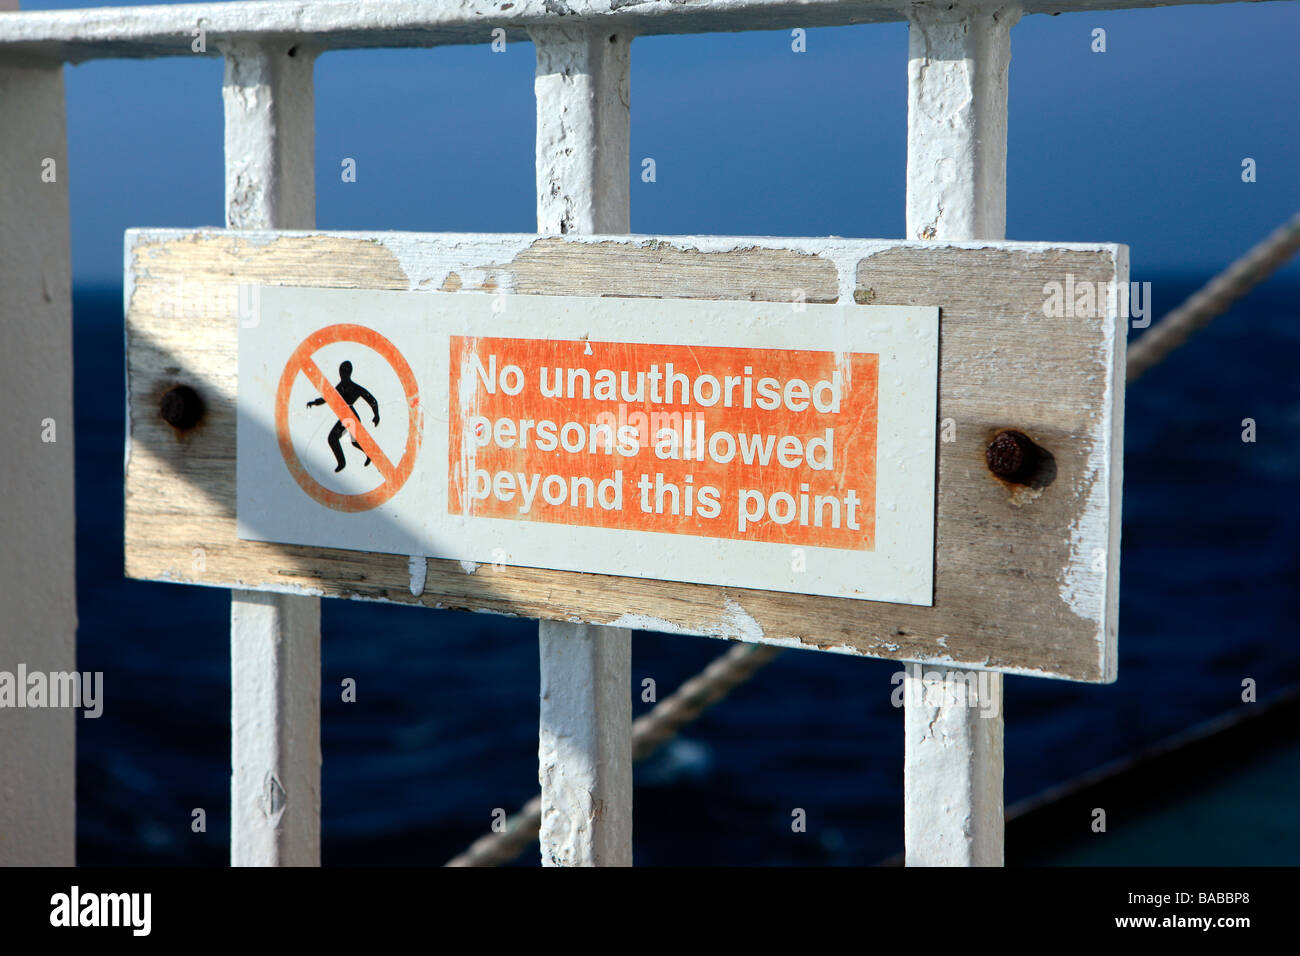 No unauthorised person allowed beyond this point sign Stock Photo